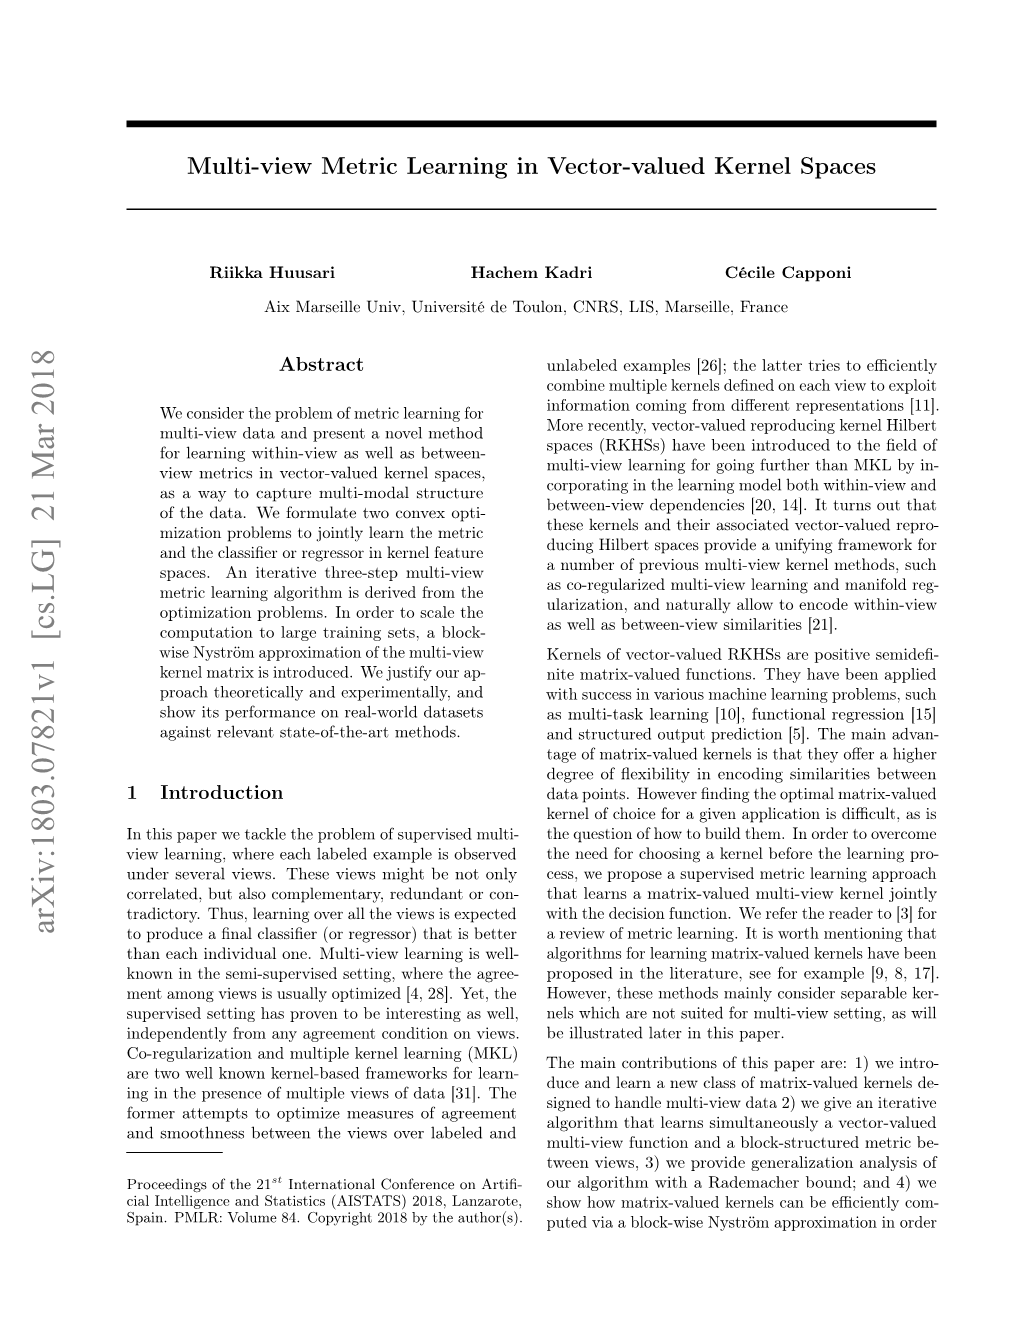 Multi-View Metric Learning in Vector-Valued Kernel Spaces